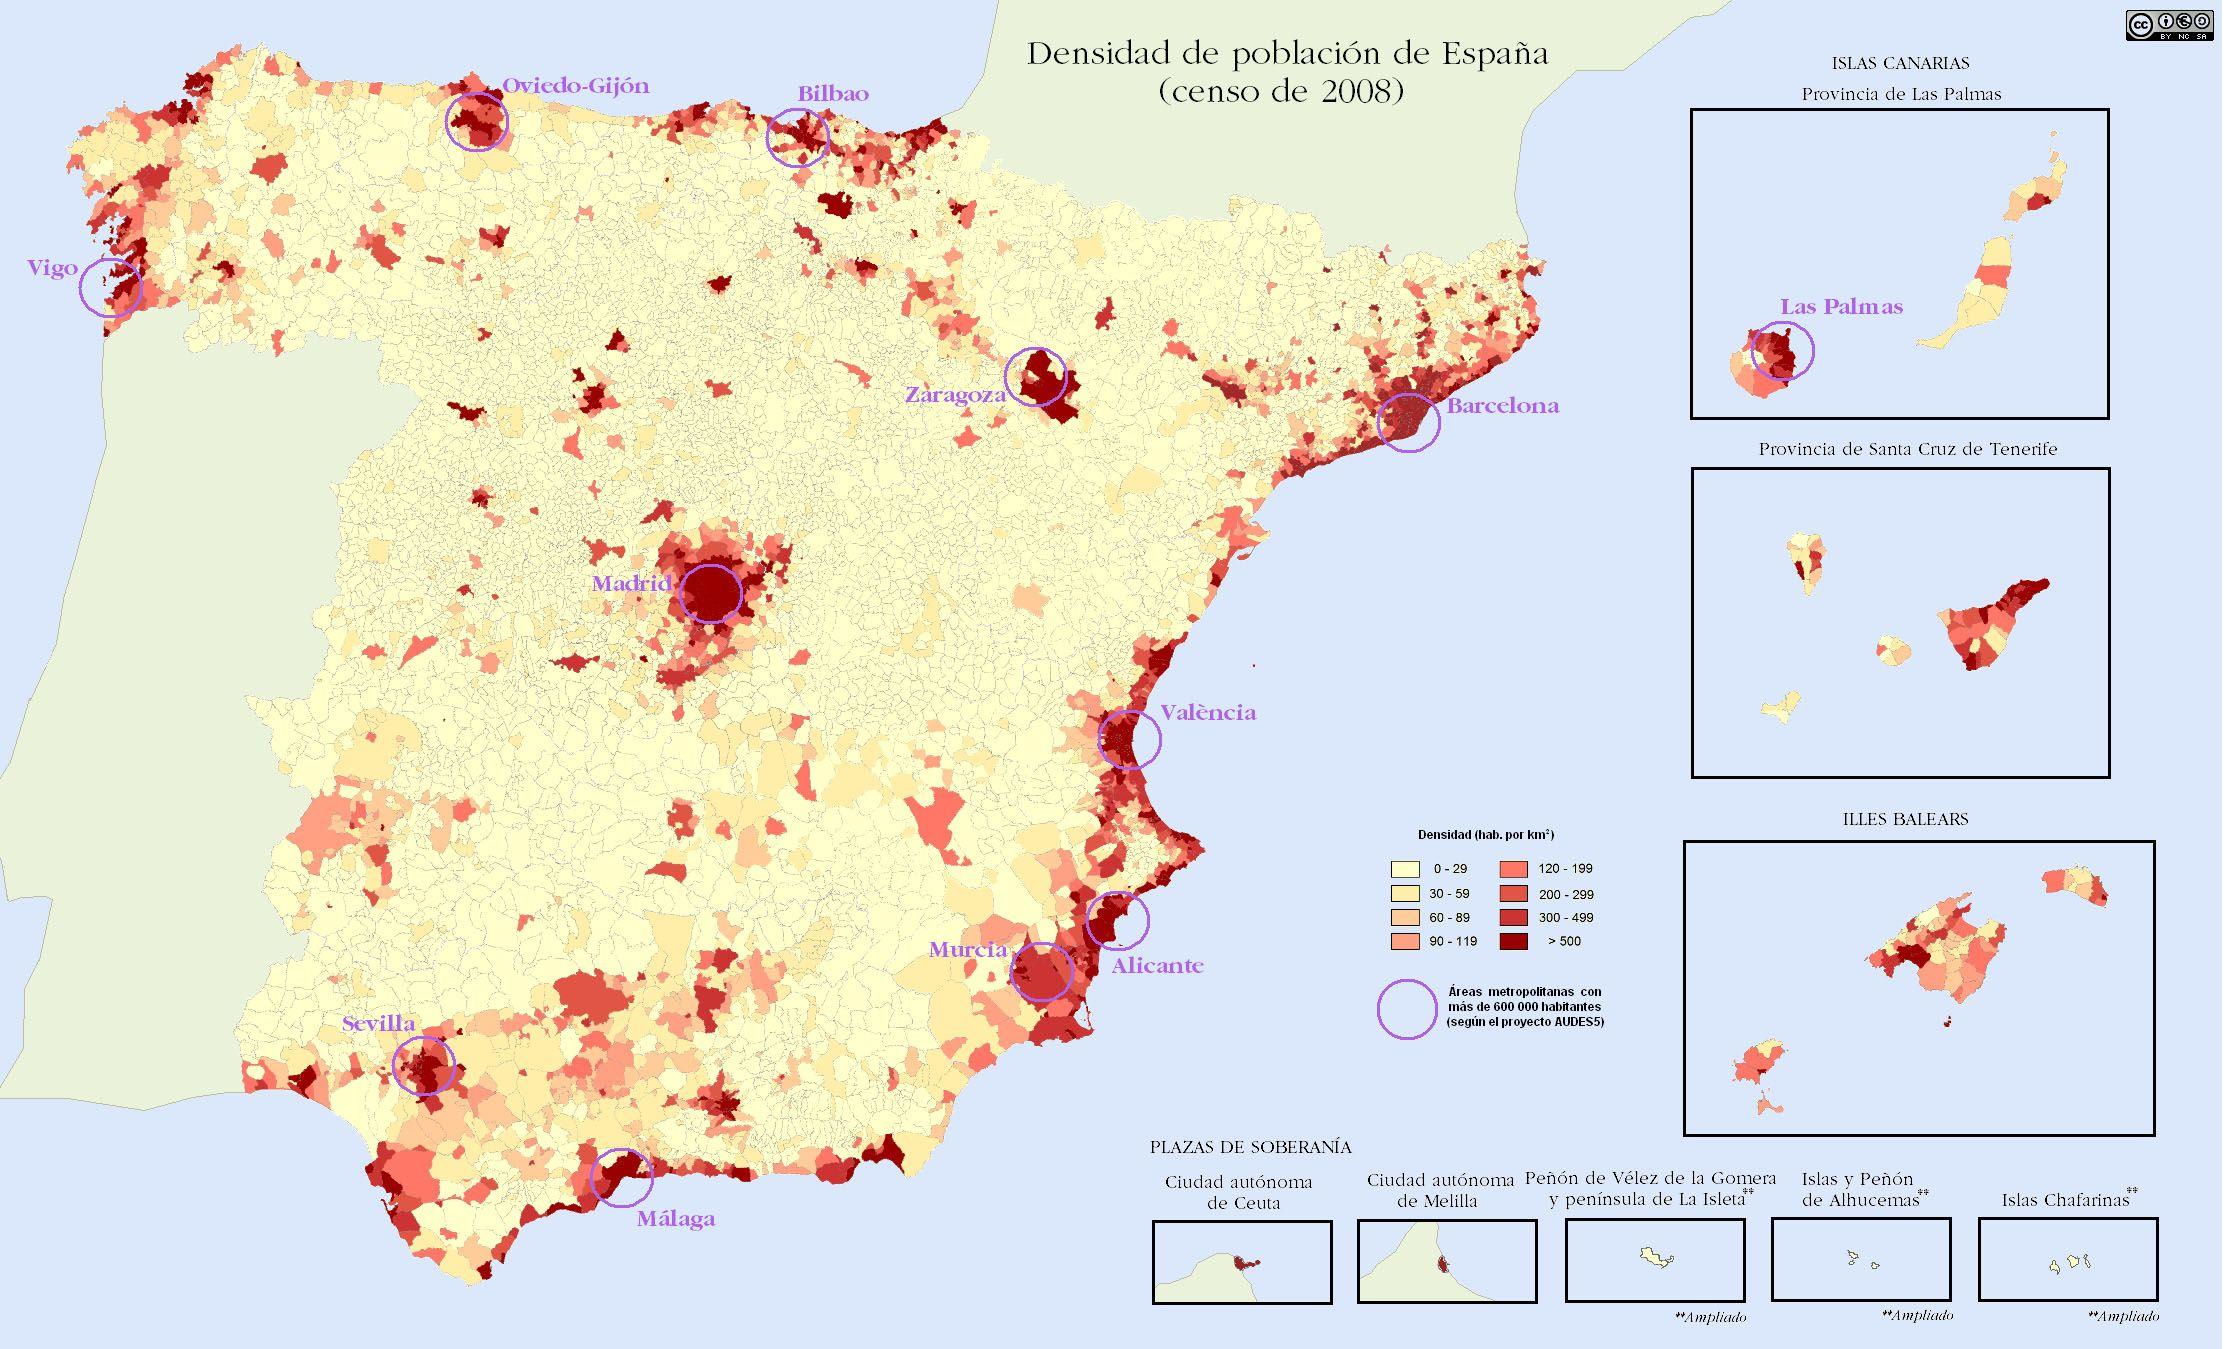 Spain population map Spain population density map (Southern Europe